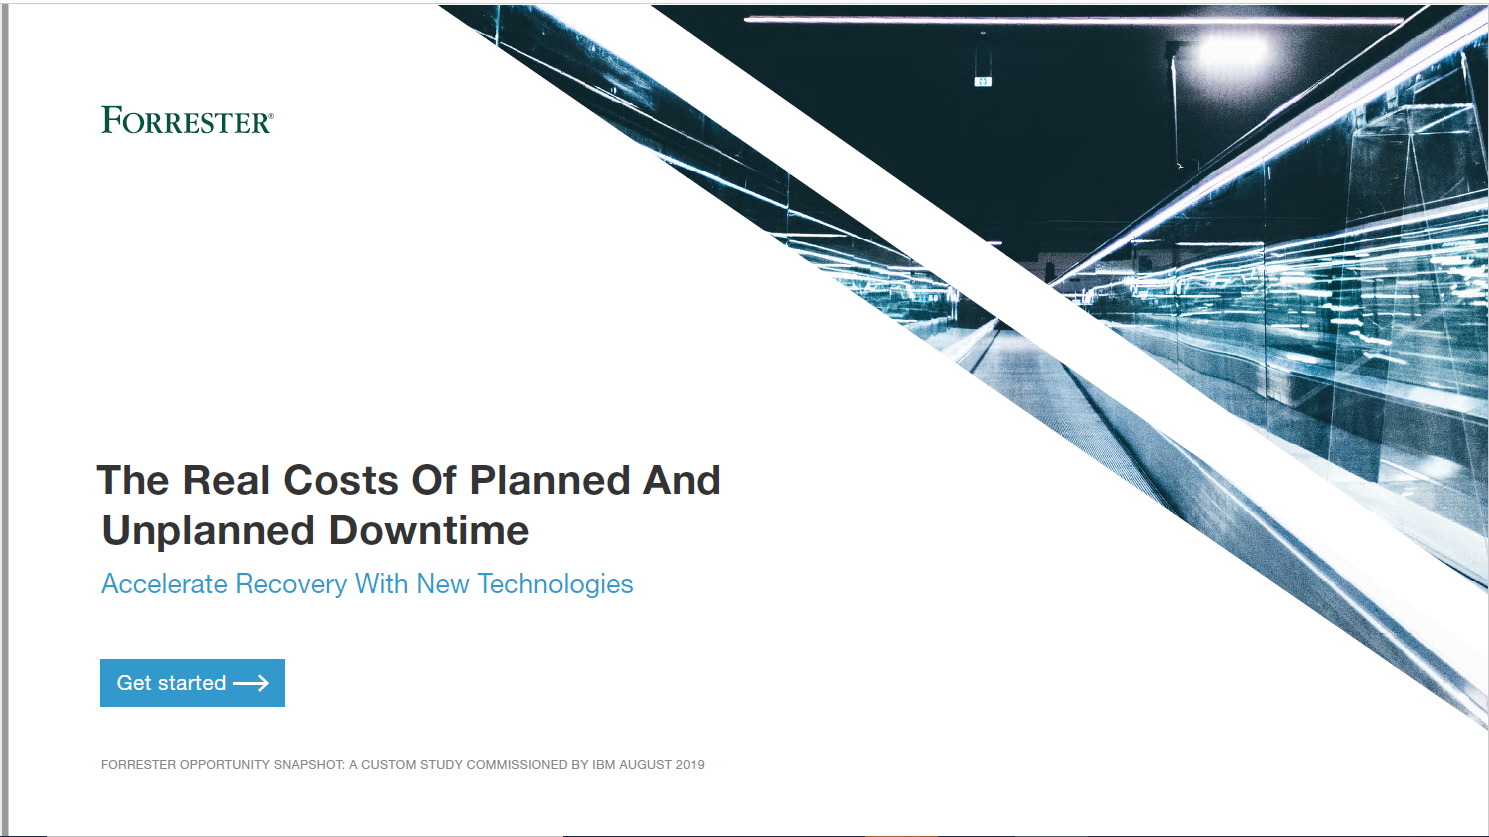 The Real Costs Of Planned And Unplanned Downtime.pdf